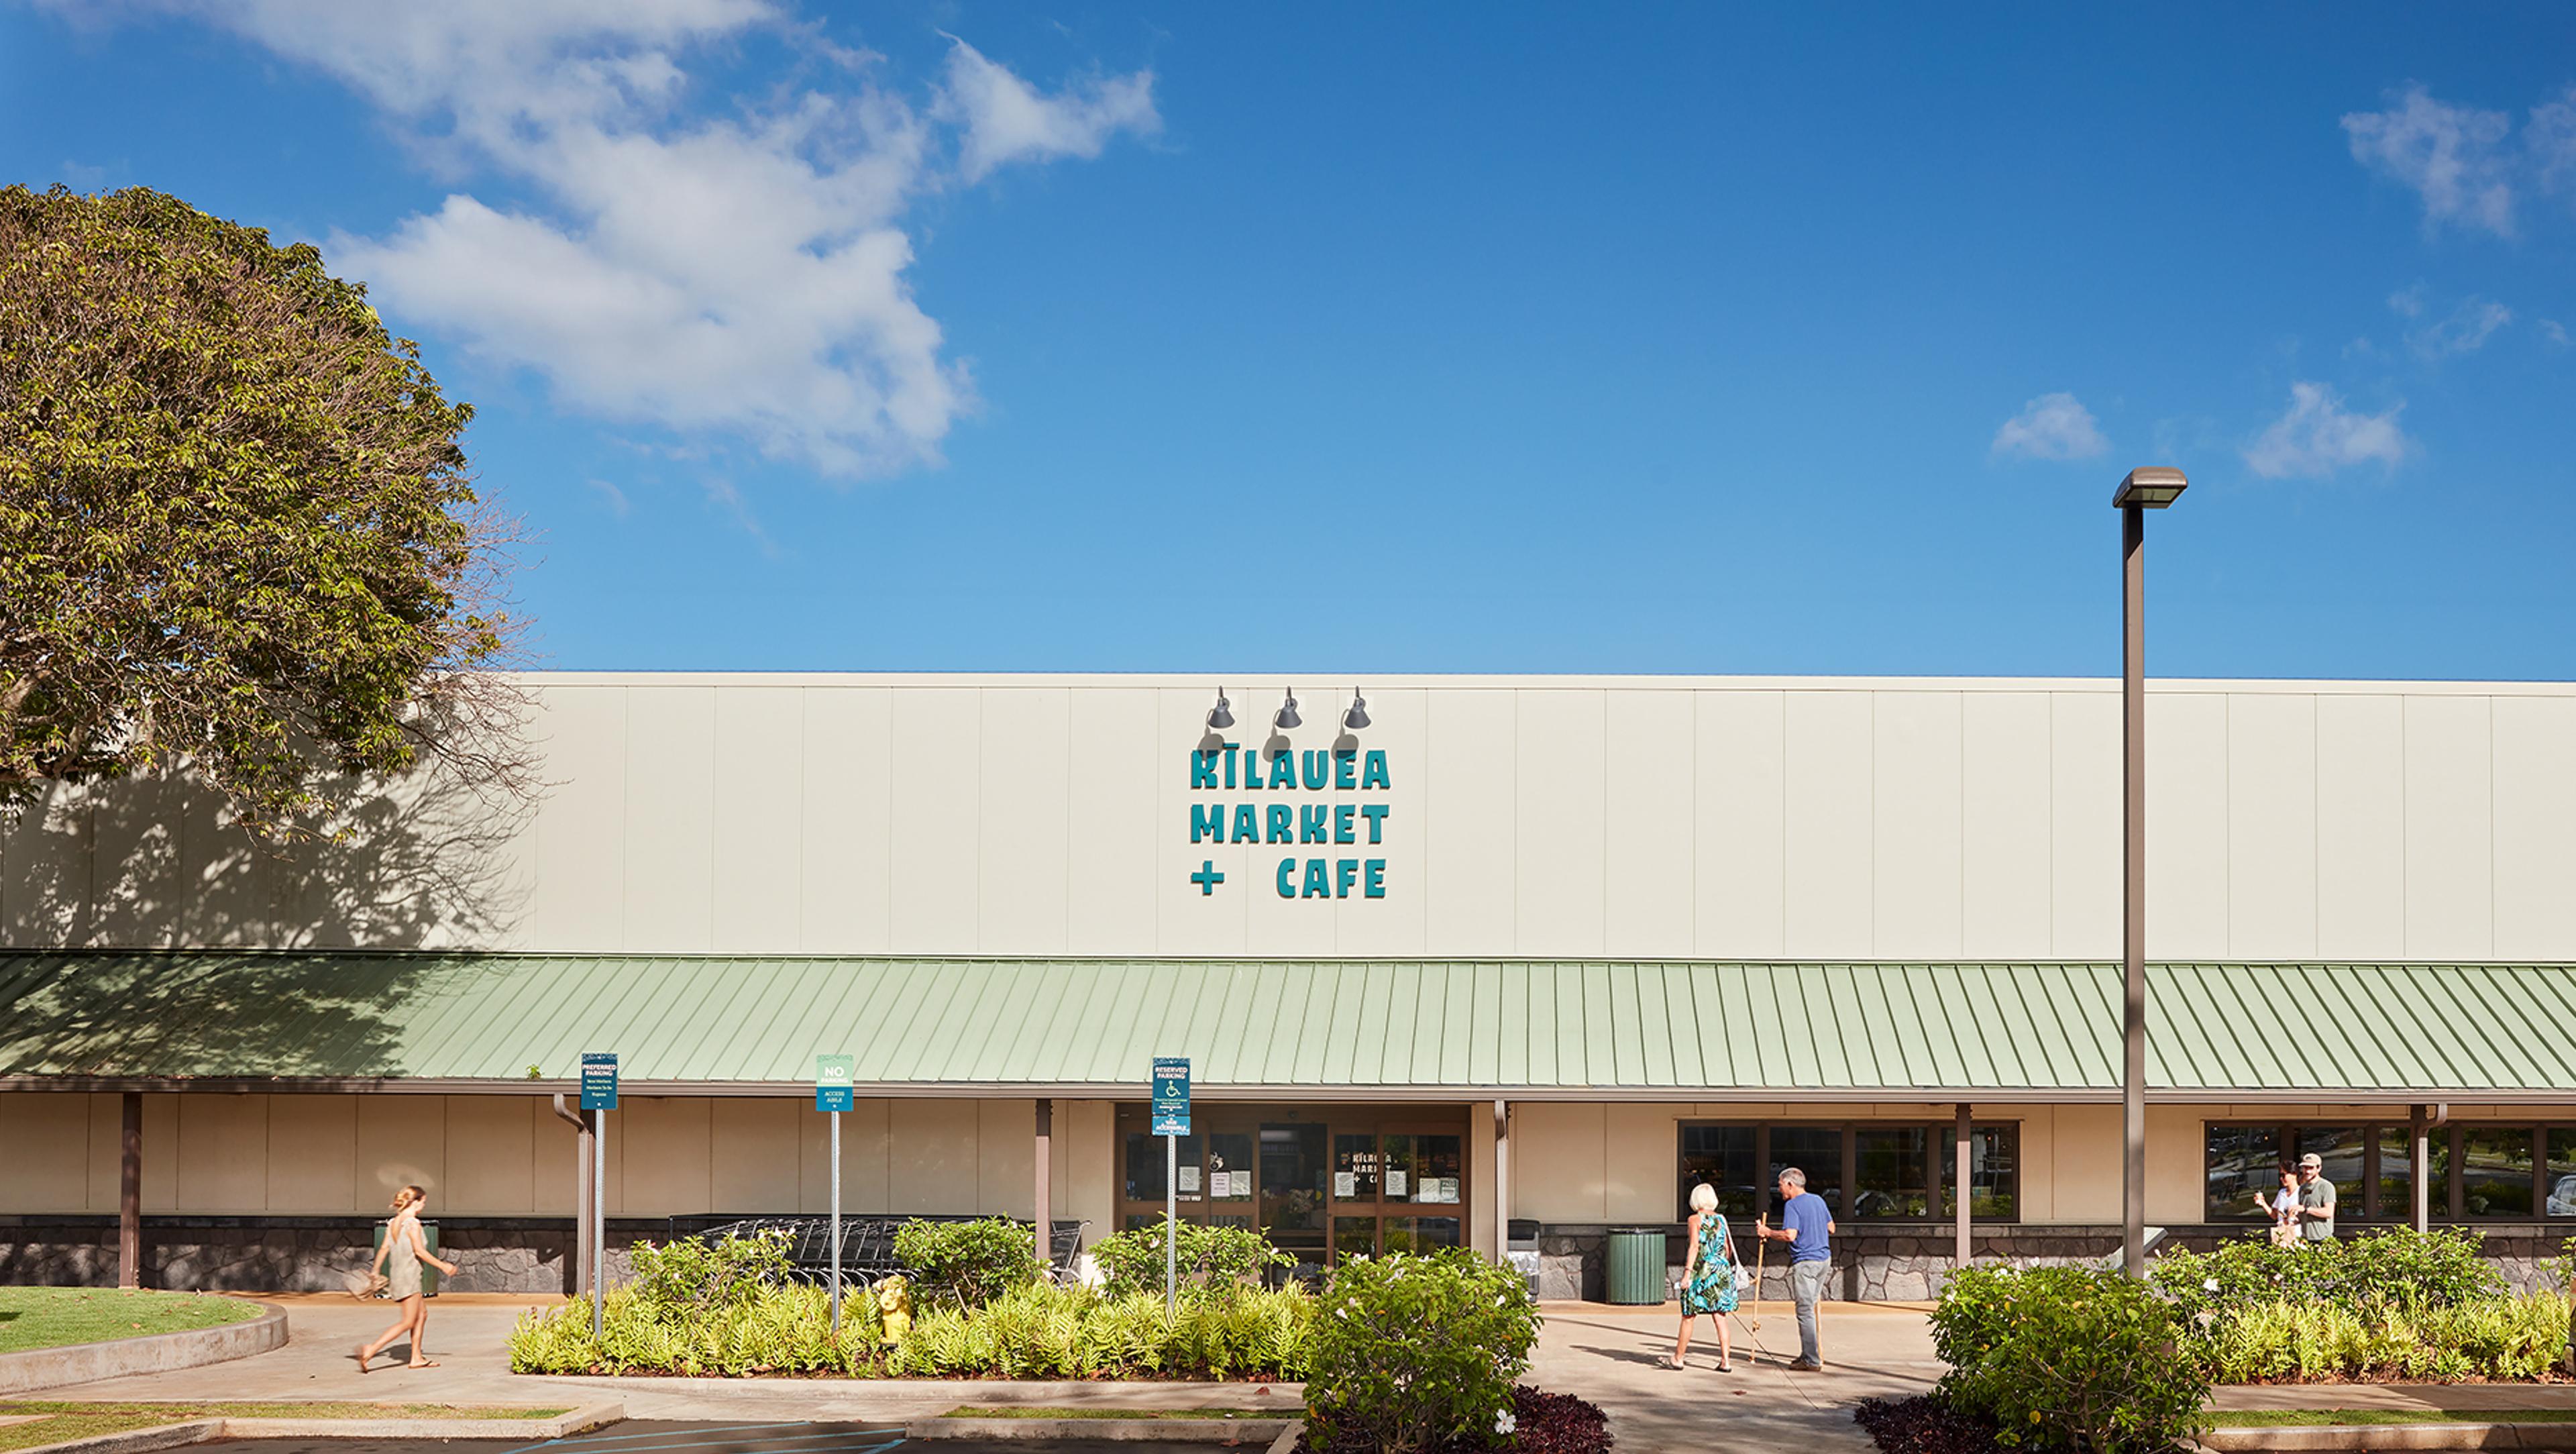 A 47,000 sf grocery anchored retail center is located in ʻĀhuimanu, Kīlauea, Hawaii.